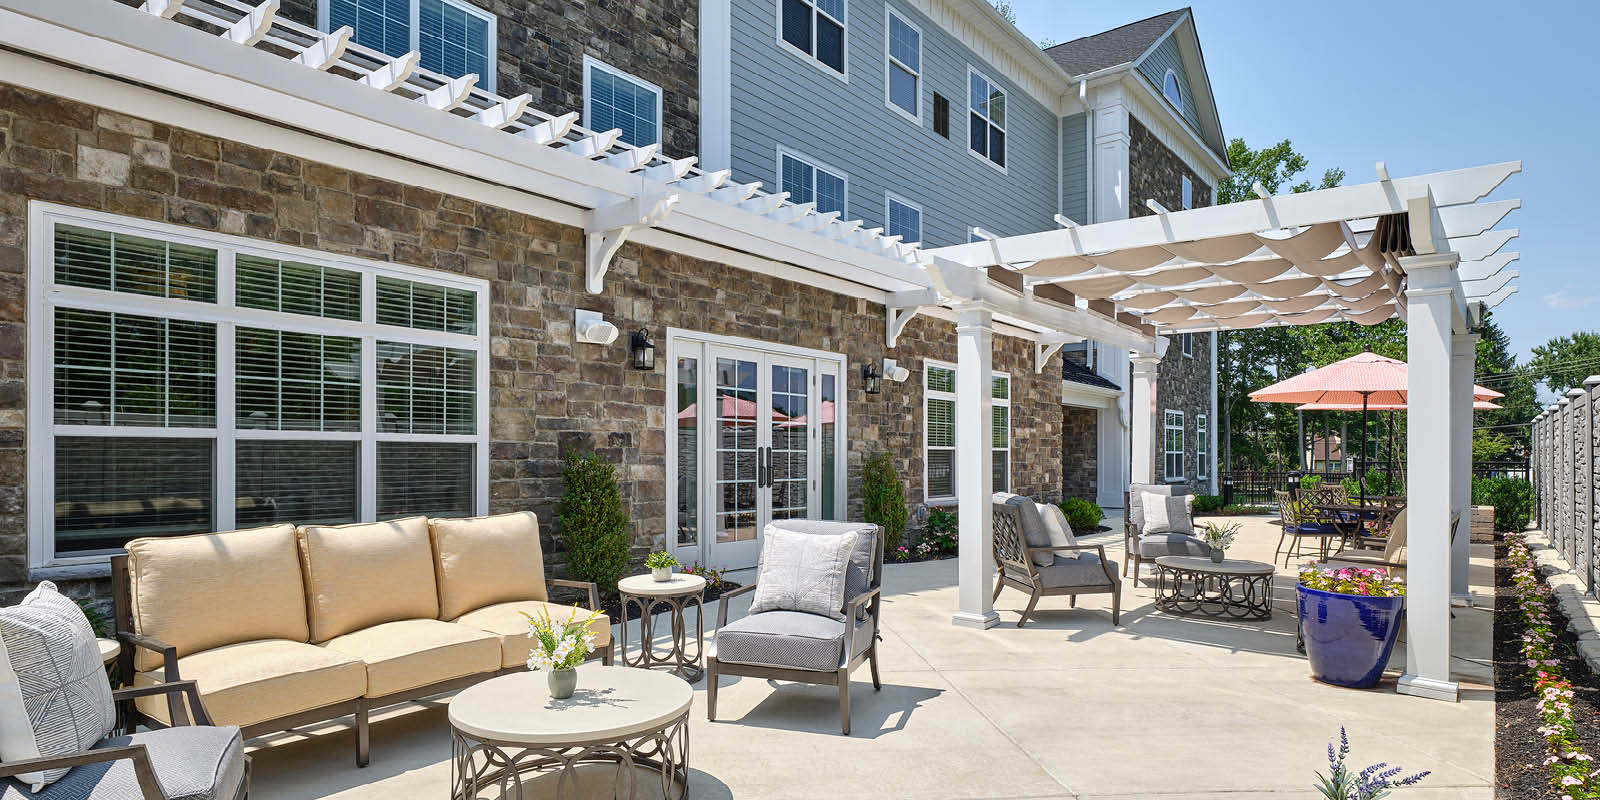 Senior Living facility's courtyard amenities with chairs and tables